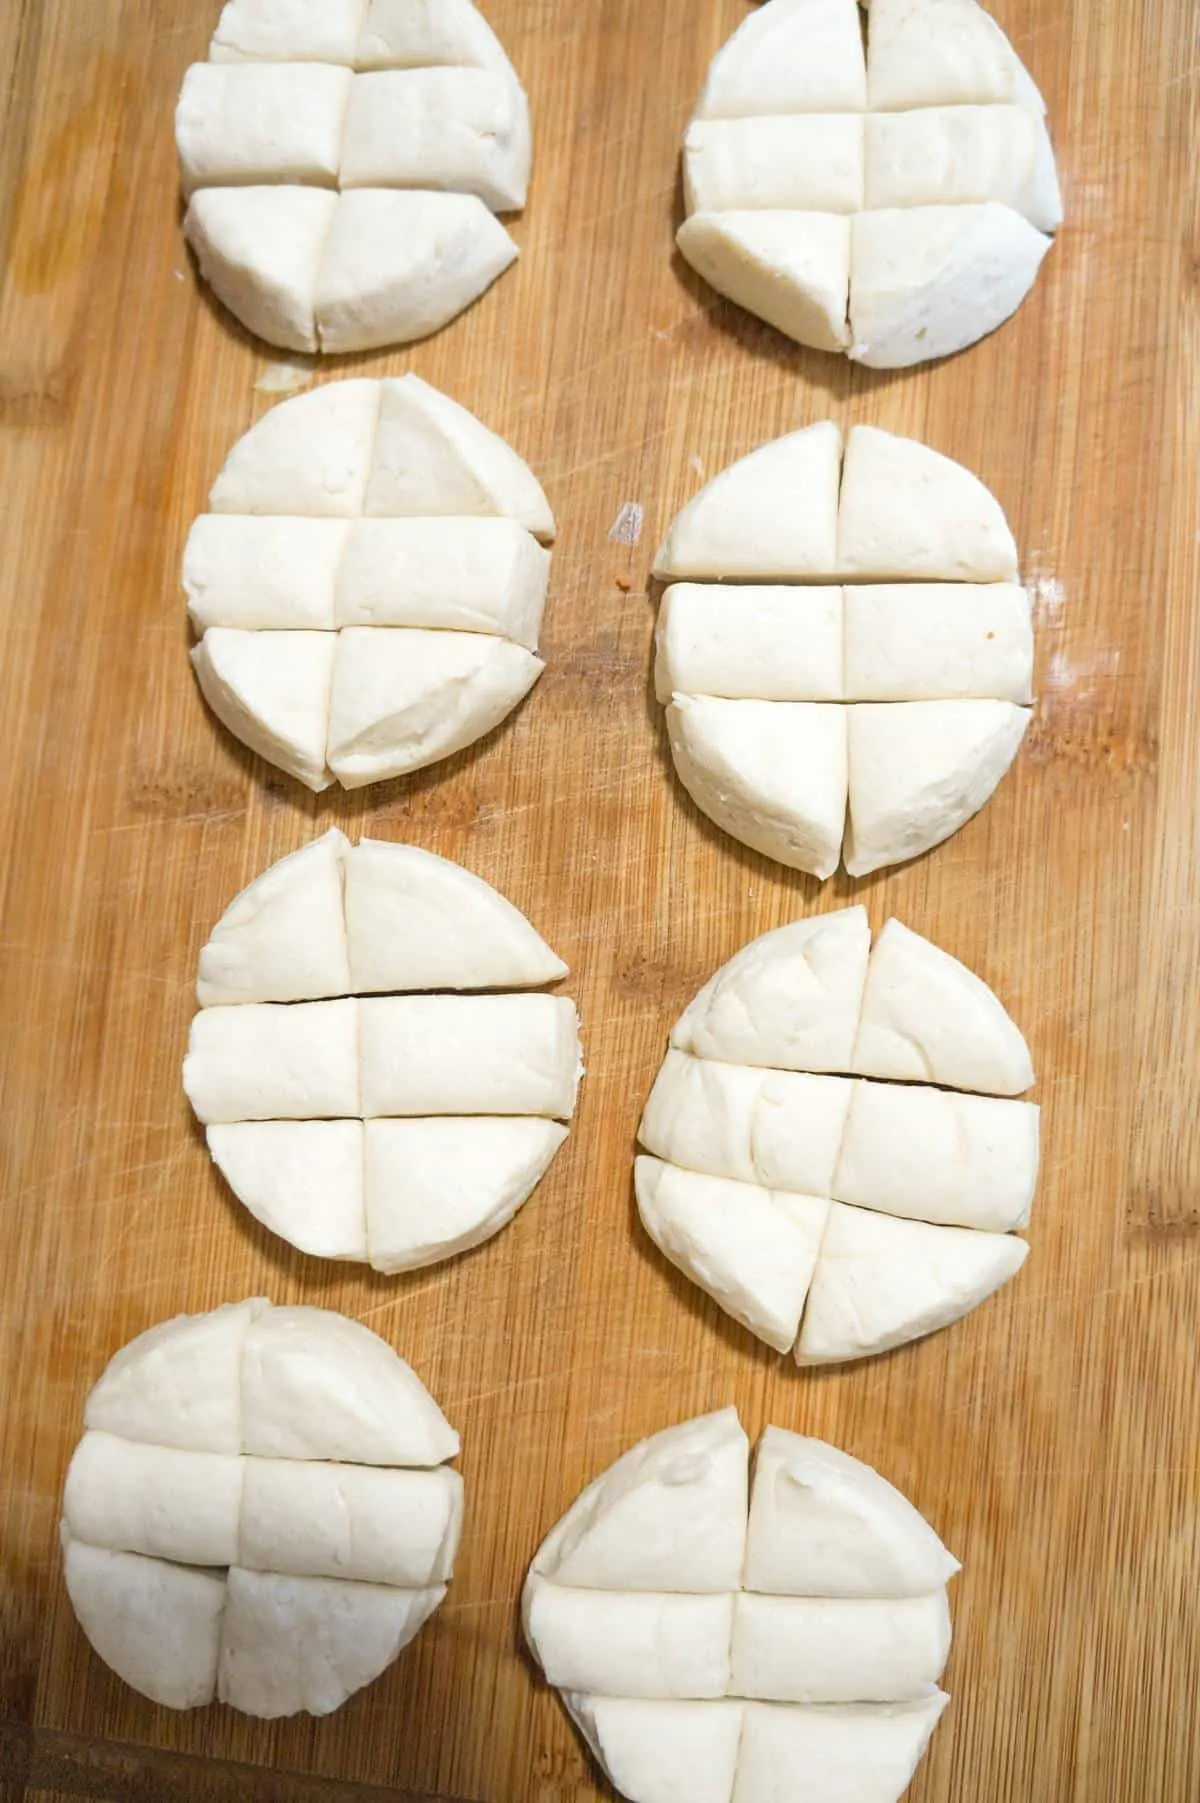 Pillsbury biscuits cut into six pieces each